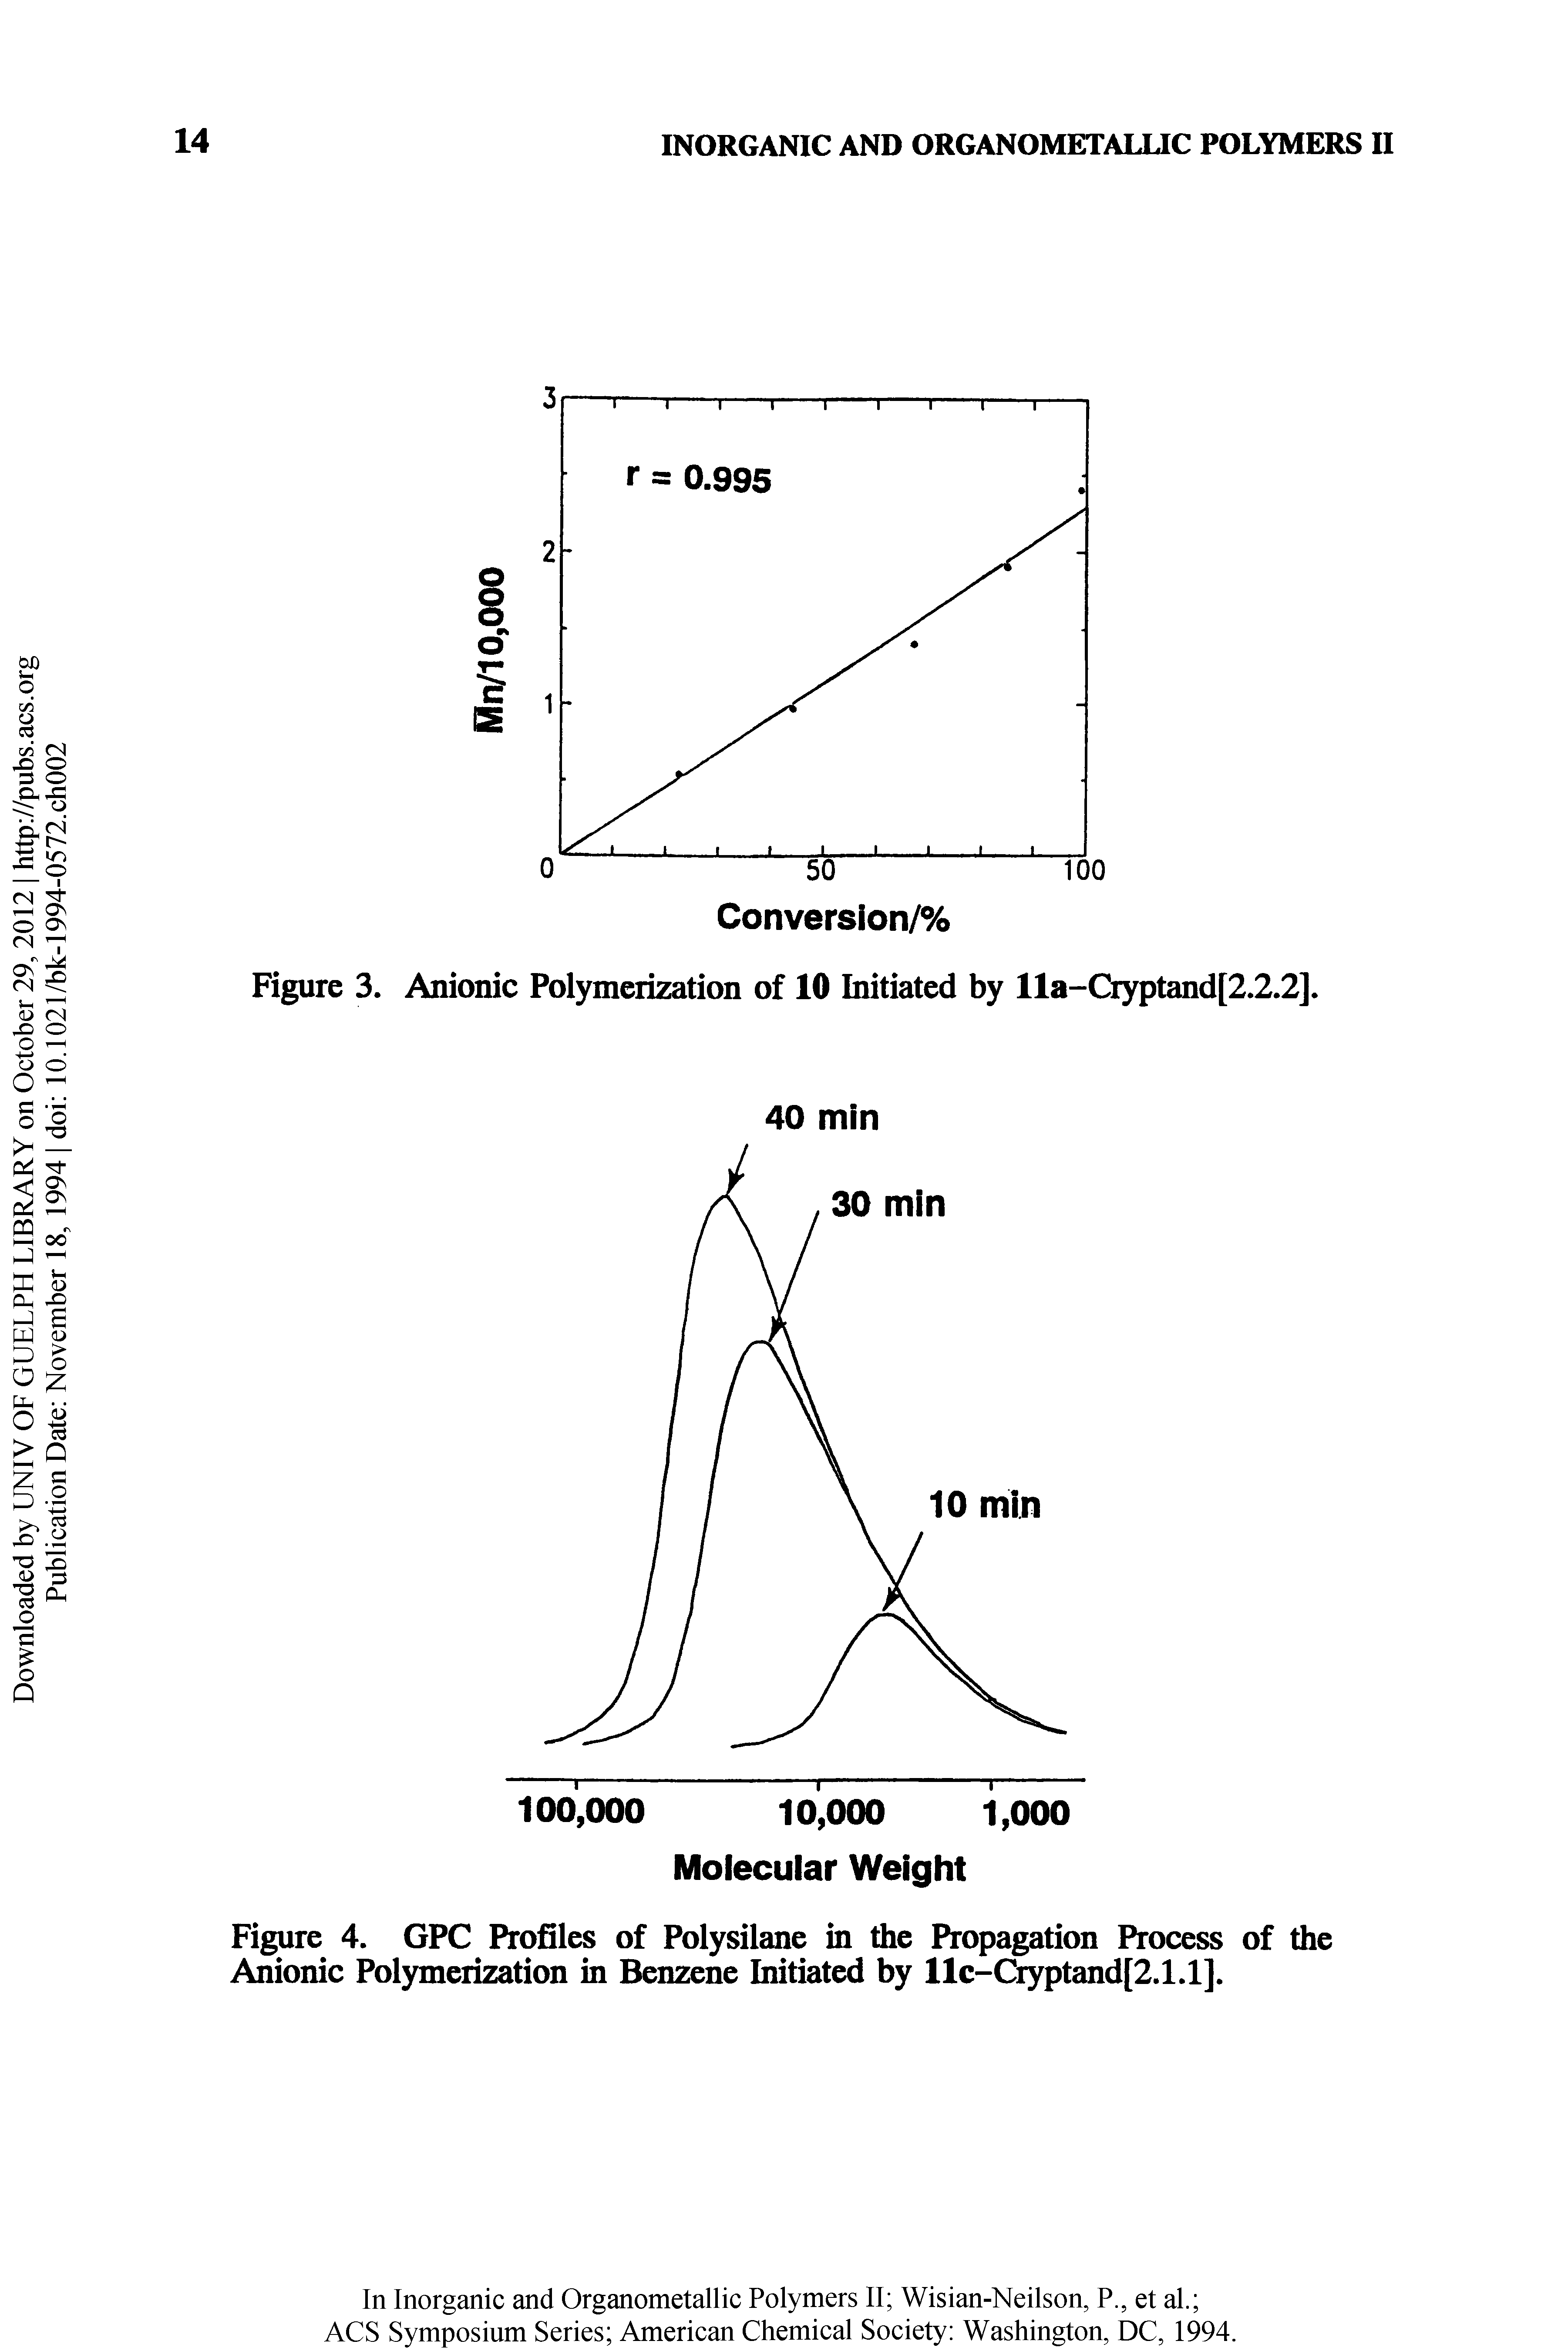 Figure 4. GPC Profiles of Polysilane in the Propagation Process of the Anionic Polymerization in Benzene Initiated by llc-Cryptand[2.1.1].